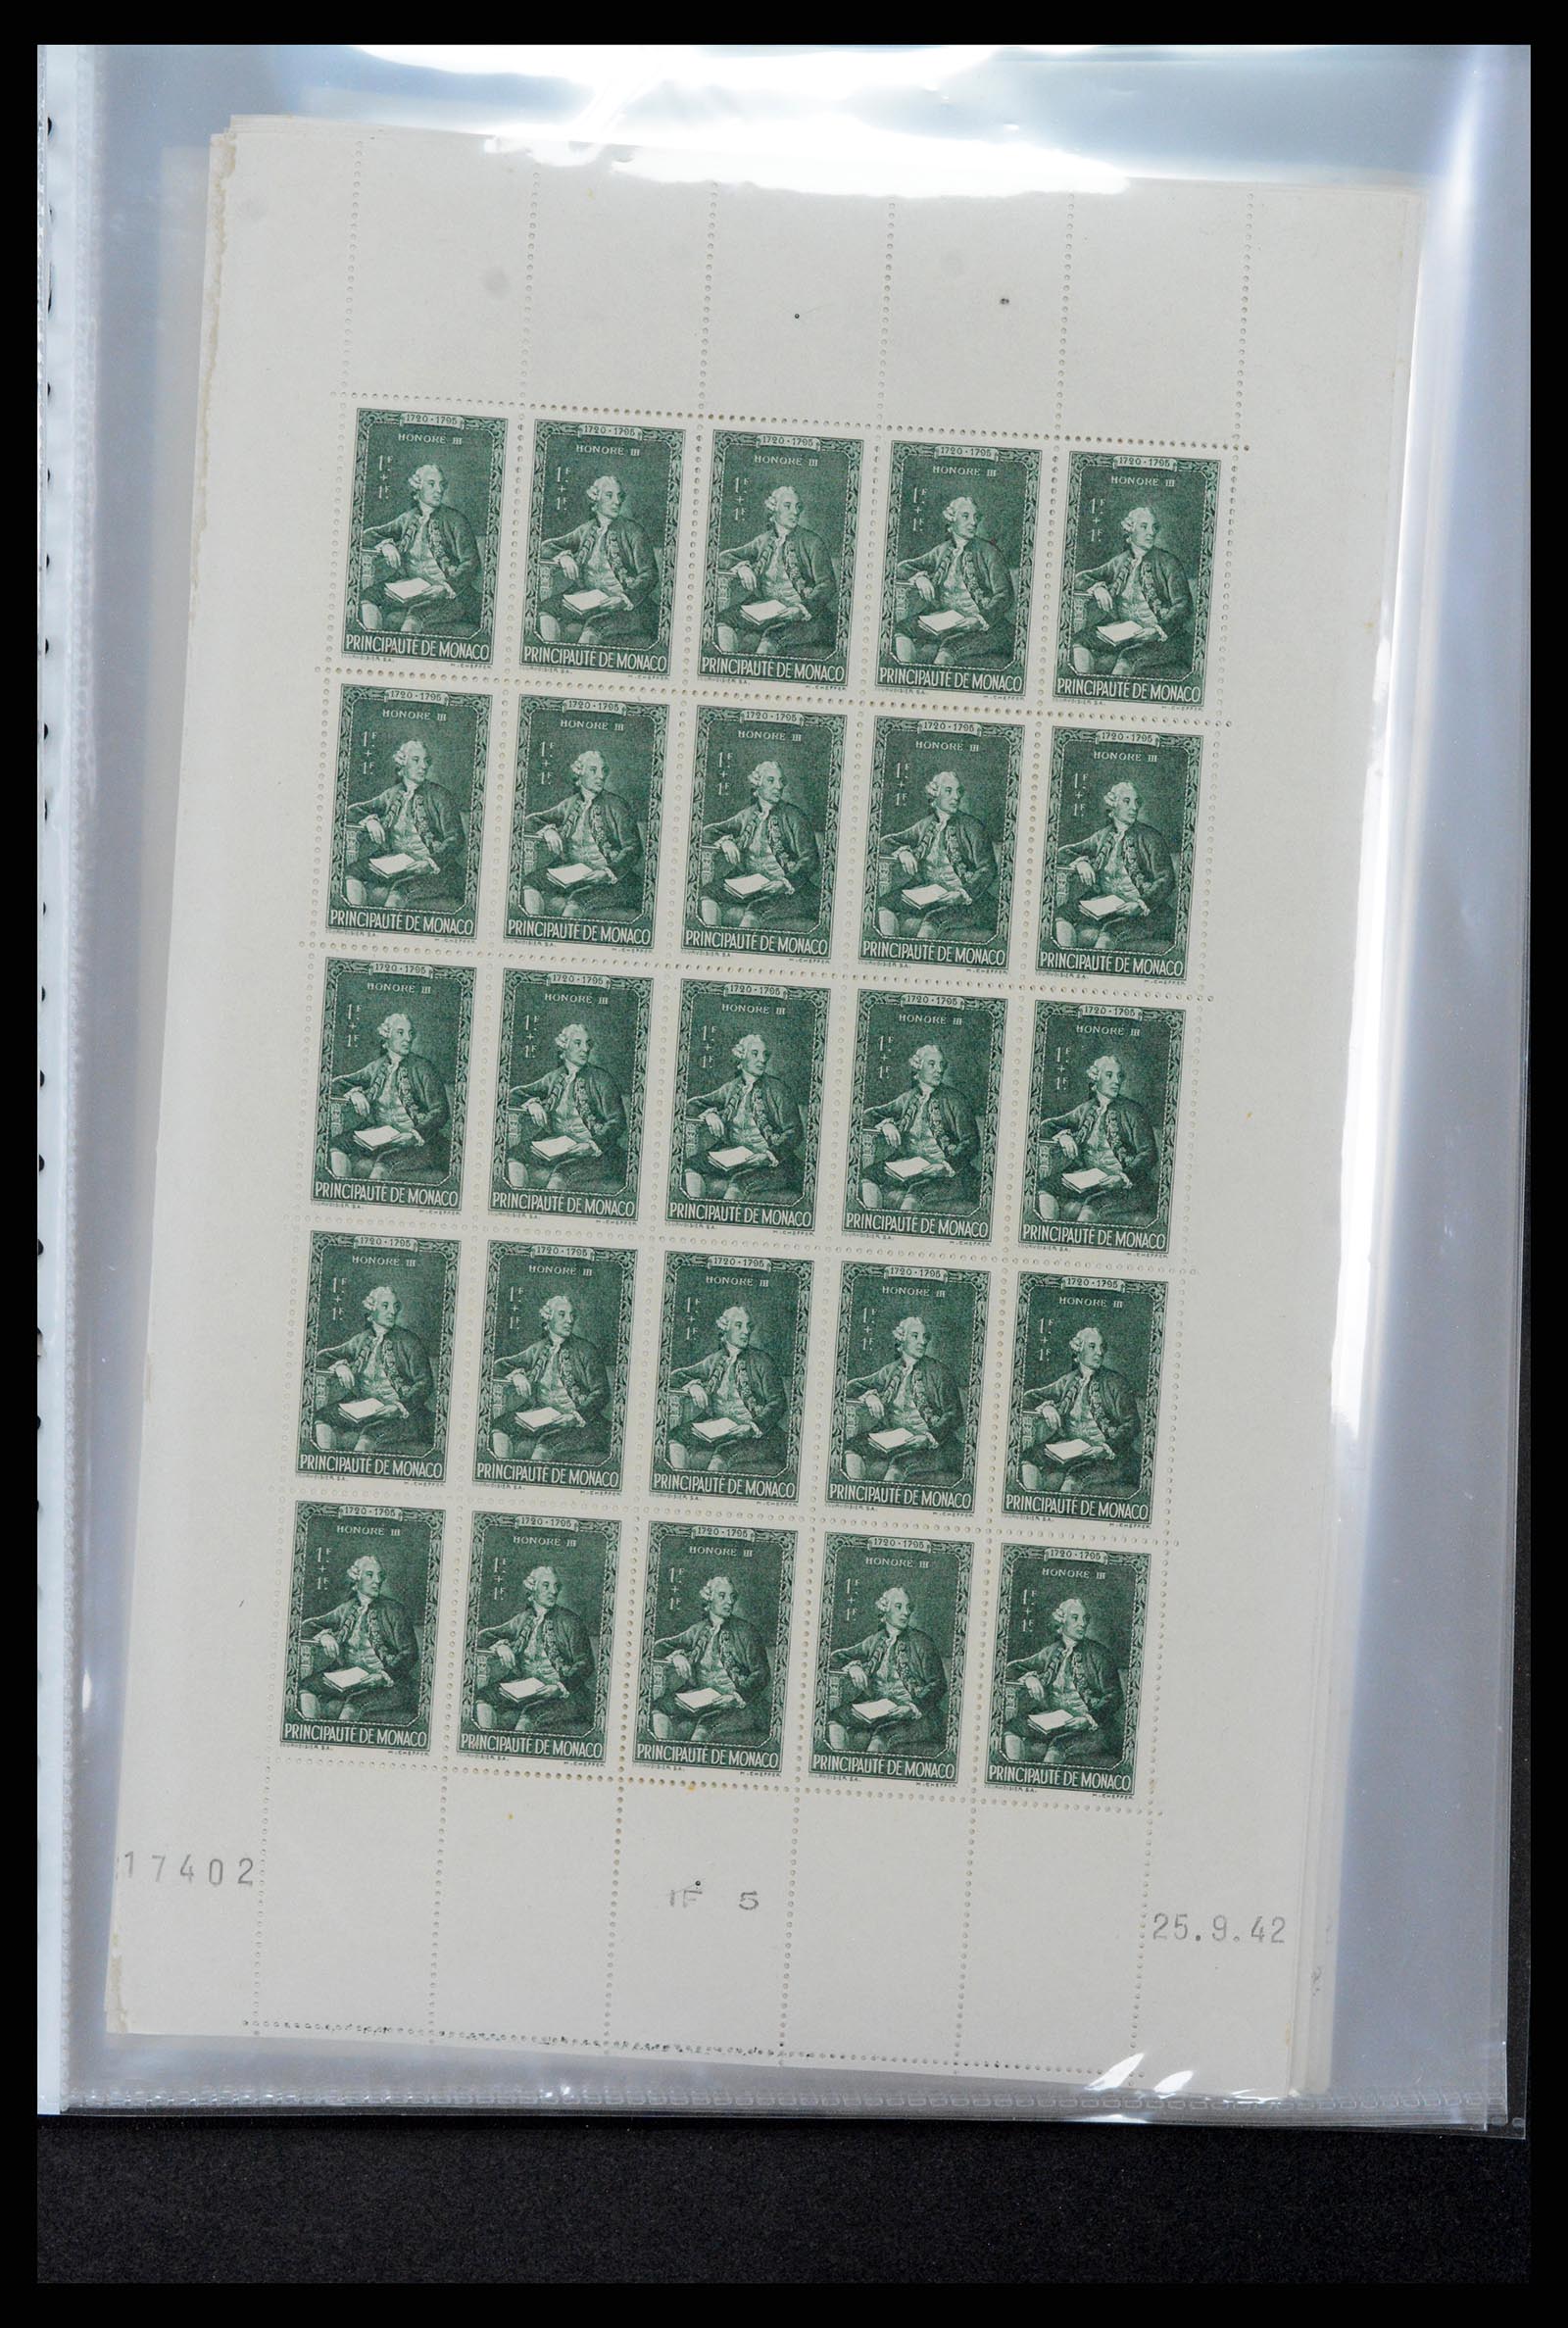 37984 024 - Stamp collection 37984 Monaco better issues 1942-1982.